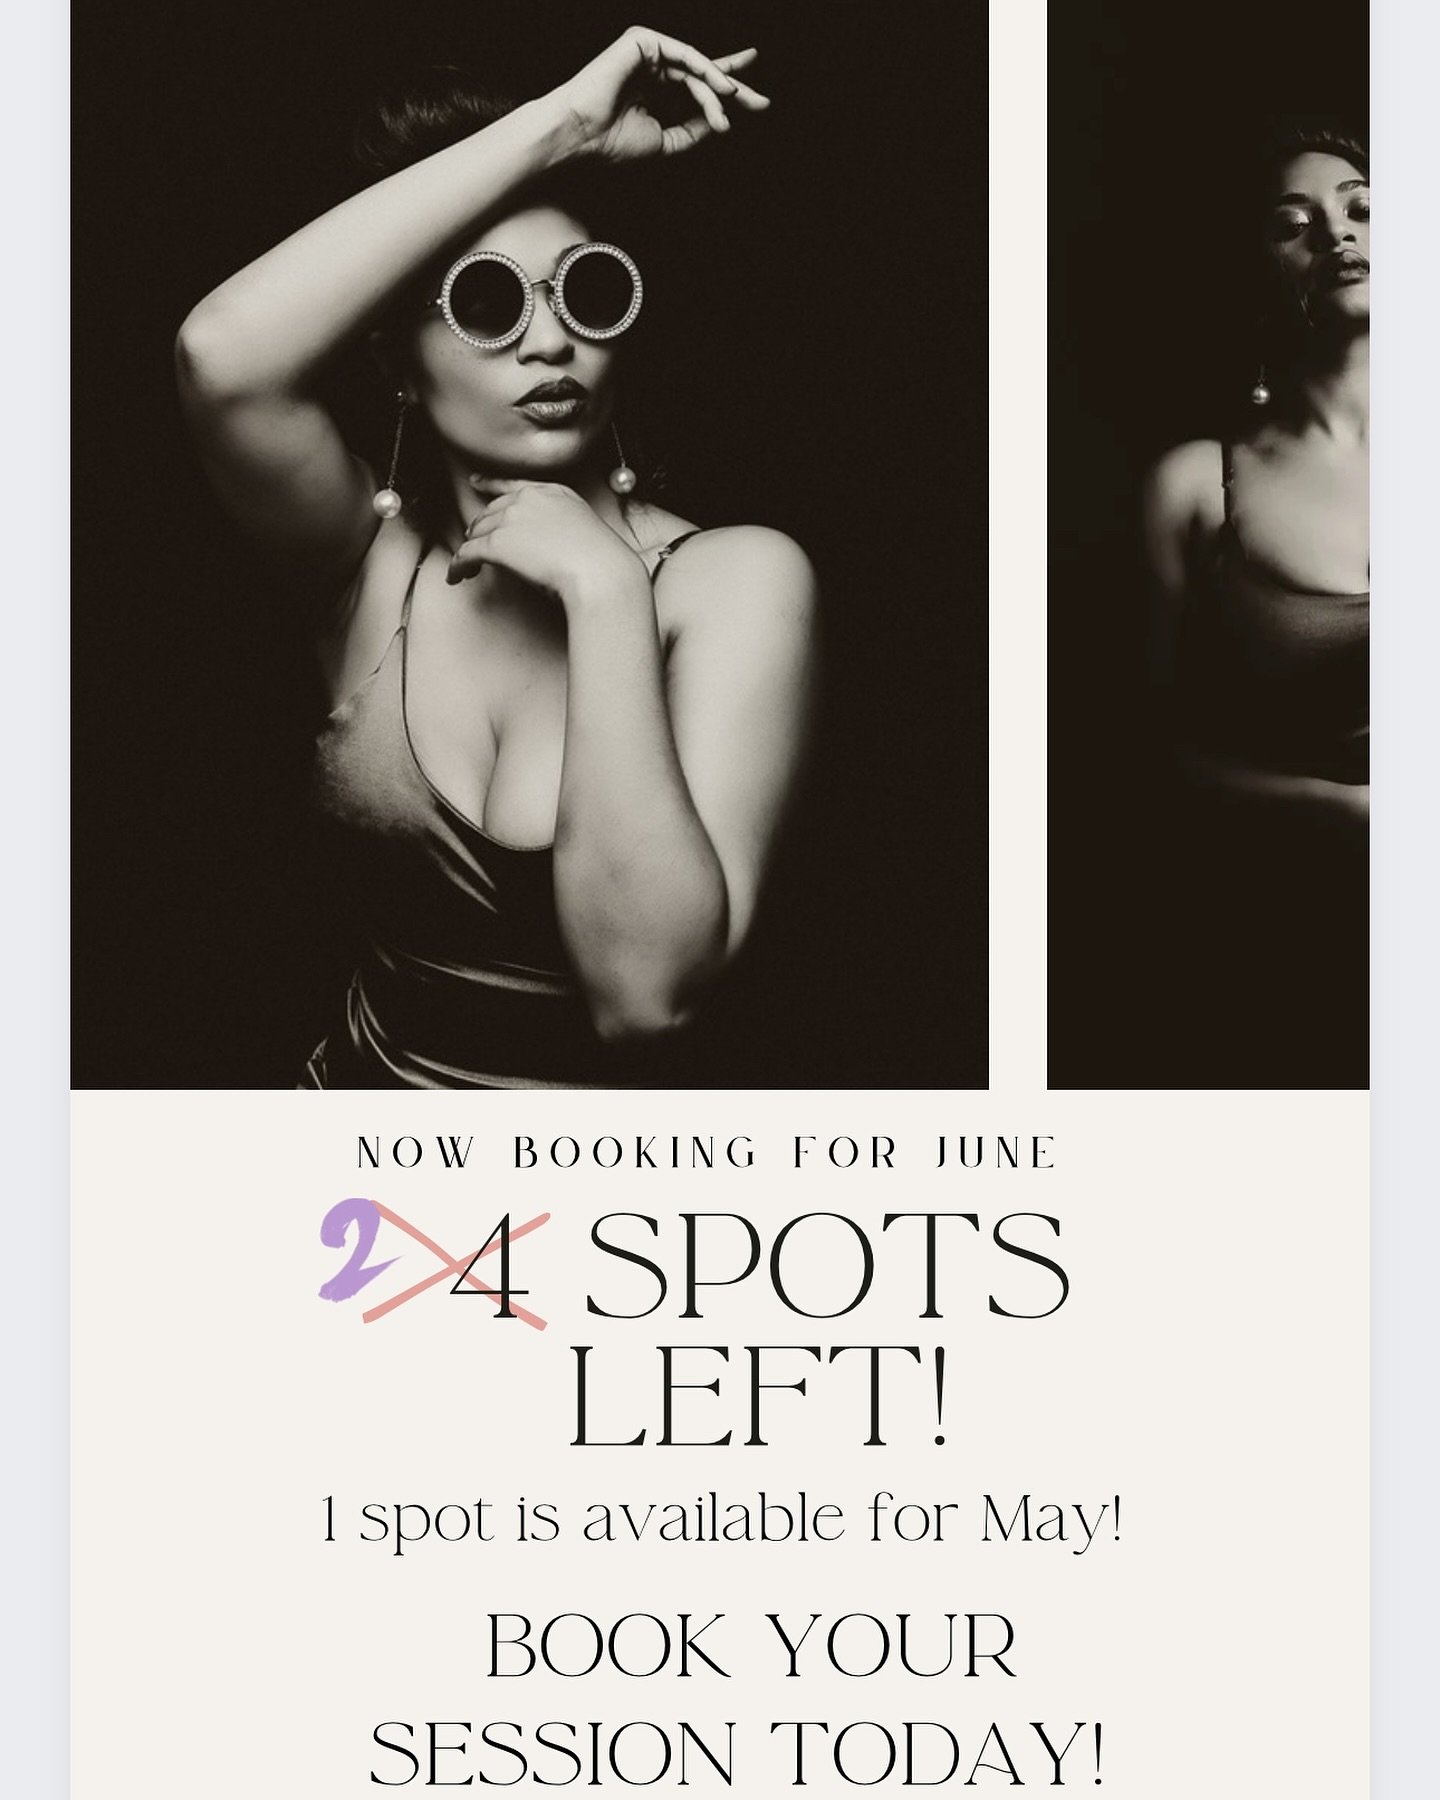 I am now booking for June! I have a few openings remaining. If you would like to work together, please book your shoot now. Because I provide my clients with a fantastic experience and customer service, there is a lot of planning that goes into every